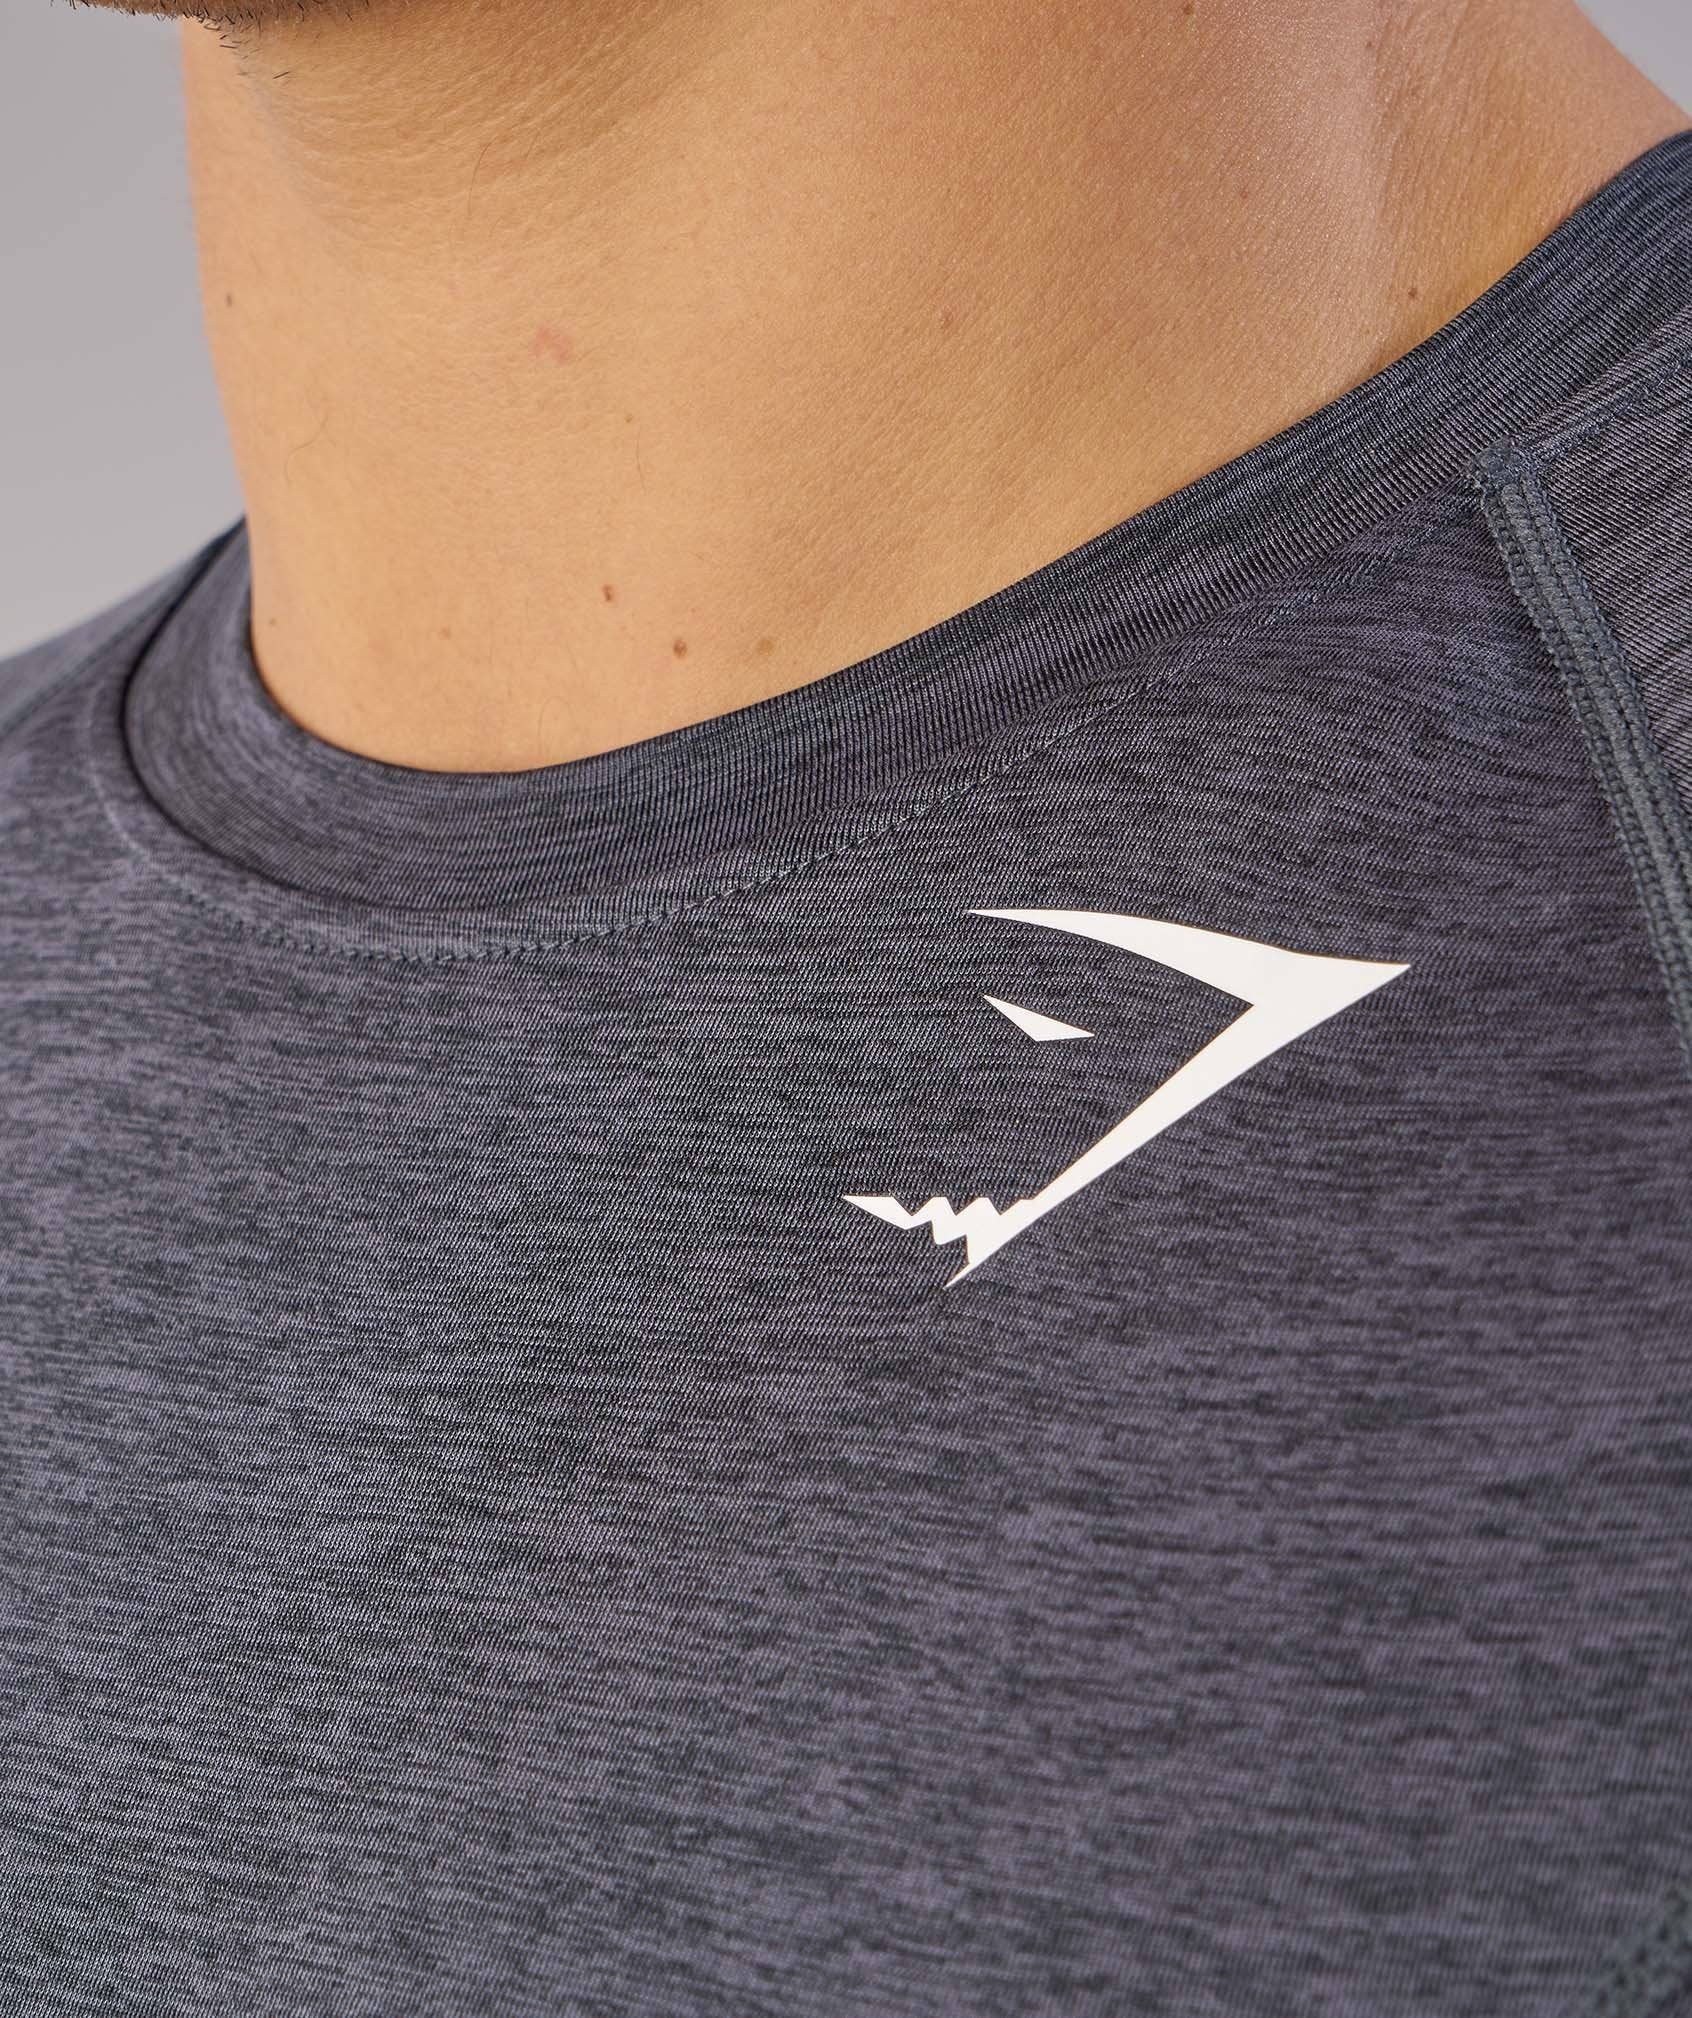 Element Baselayer Short Sleeve Top in Charcoal Marl - view 6